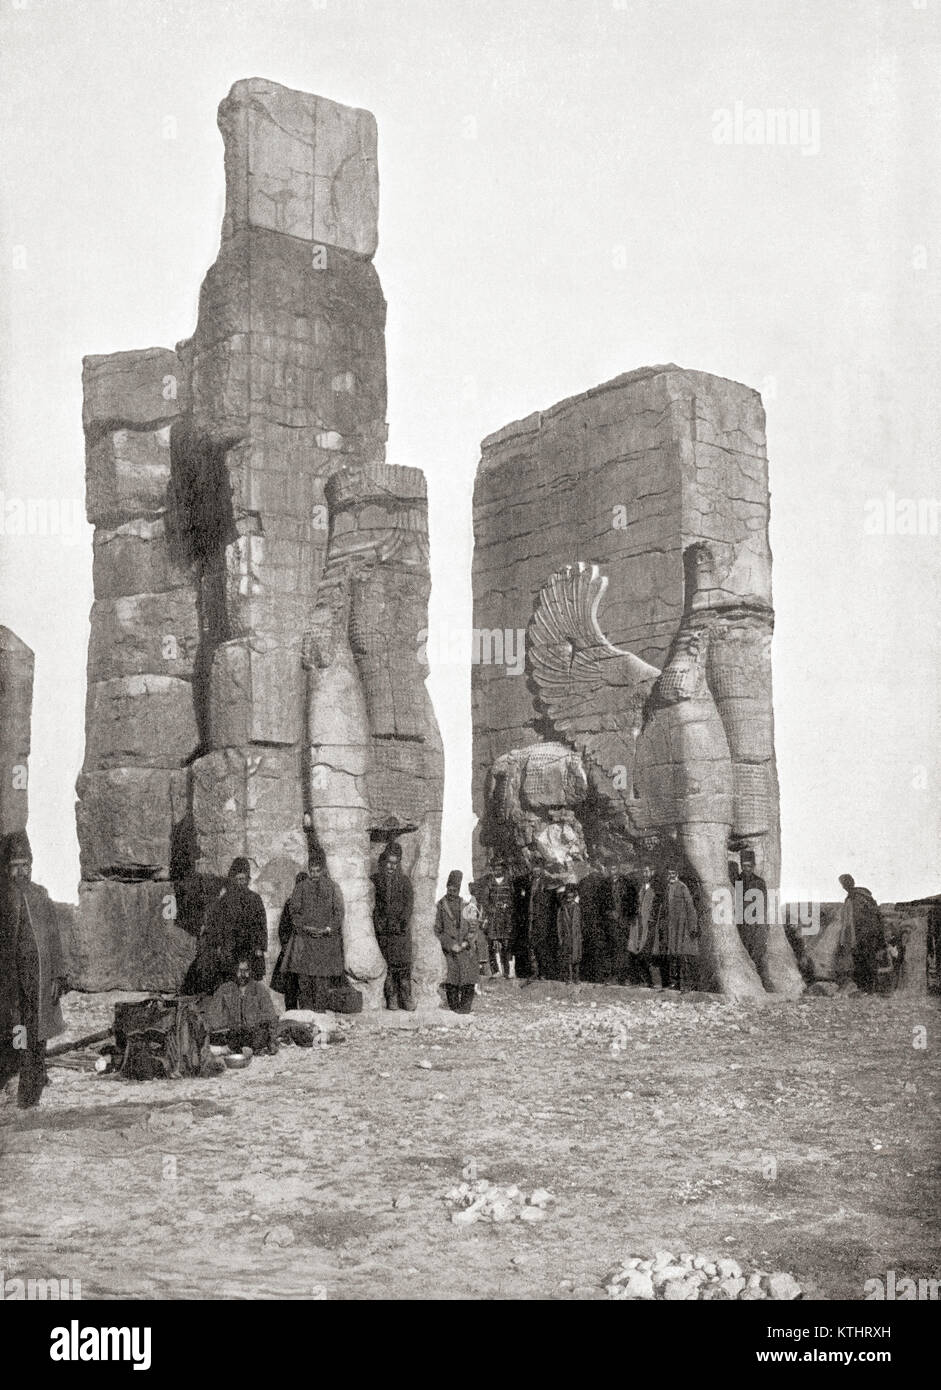 The Gate of All Nations aka Gate of Xerxes, Persepolis, Iran, seen here in the late 19th century.  From The Wonders of the World, published c.1920. Stock Photo